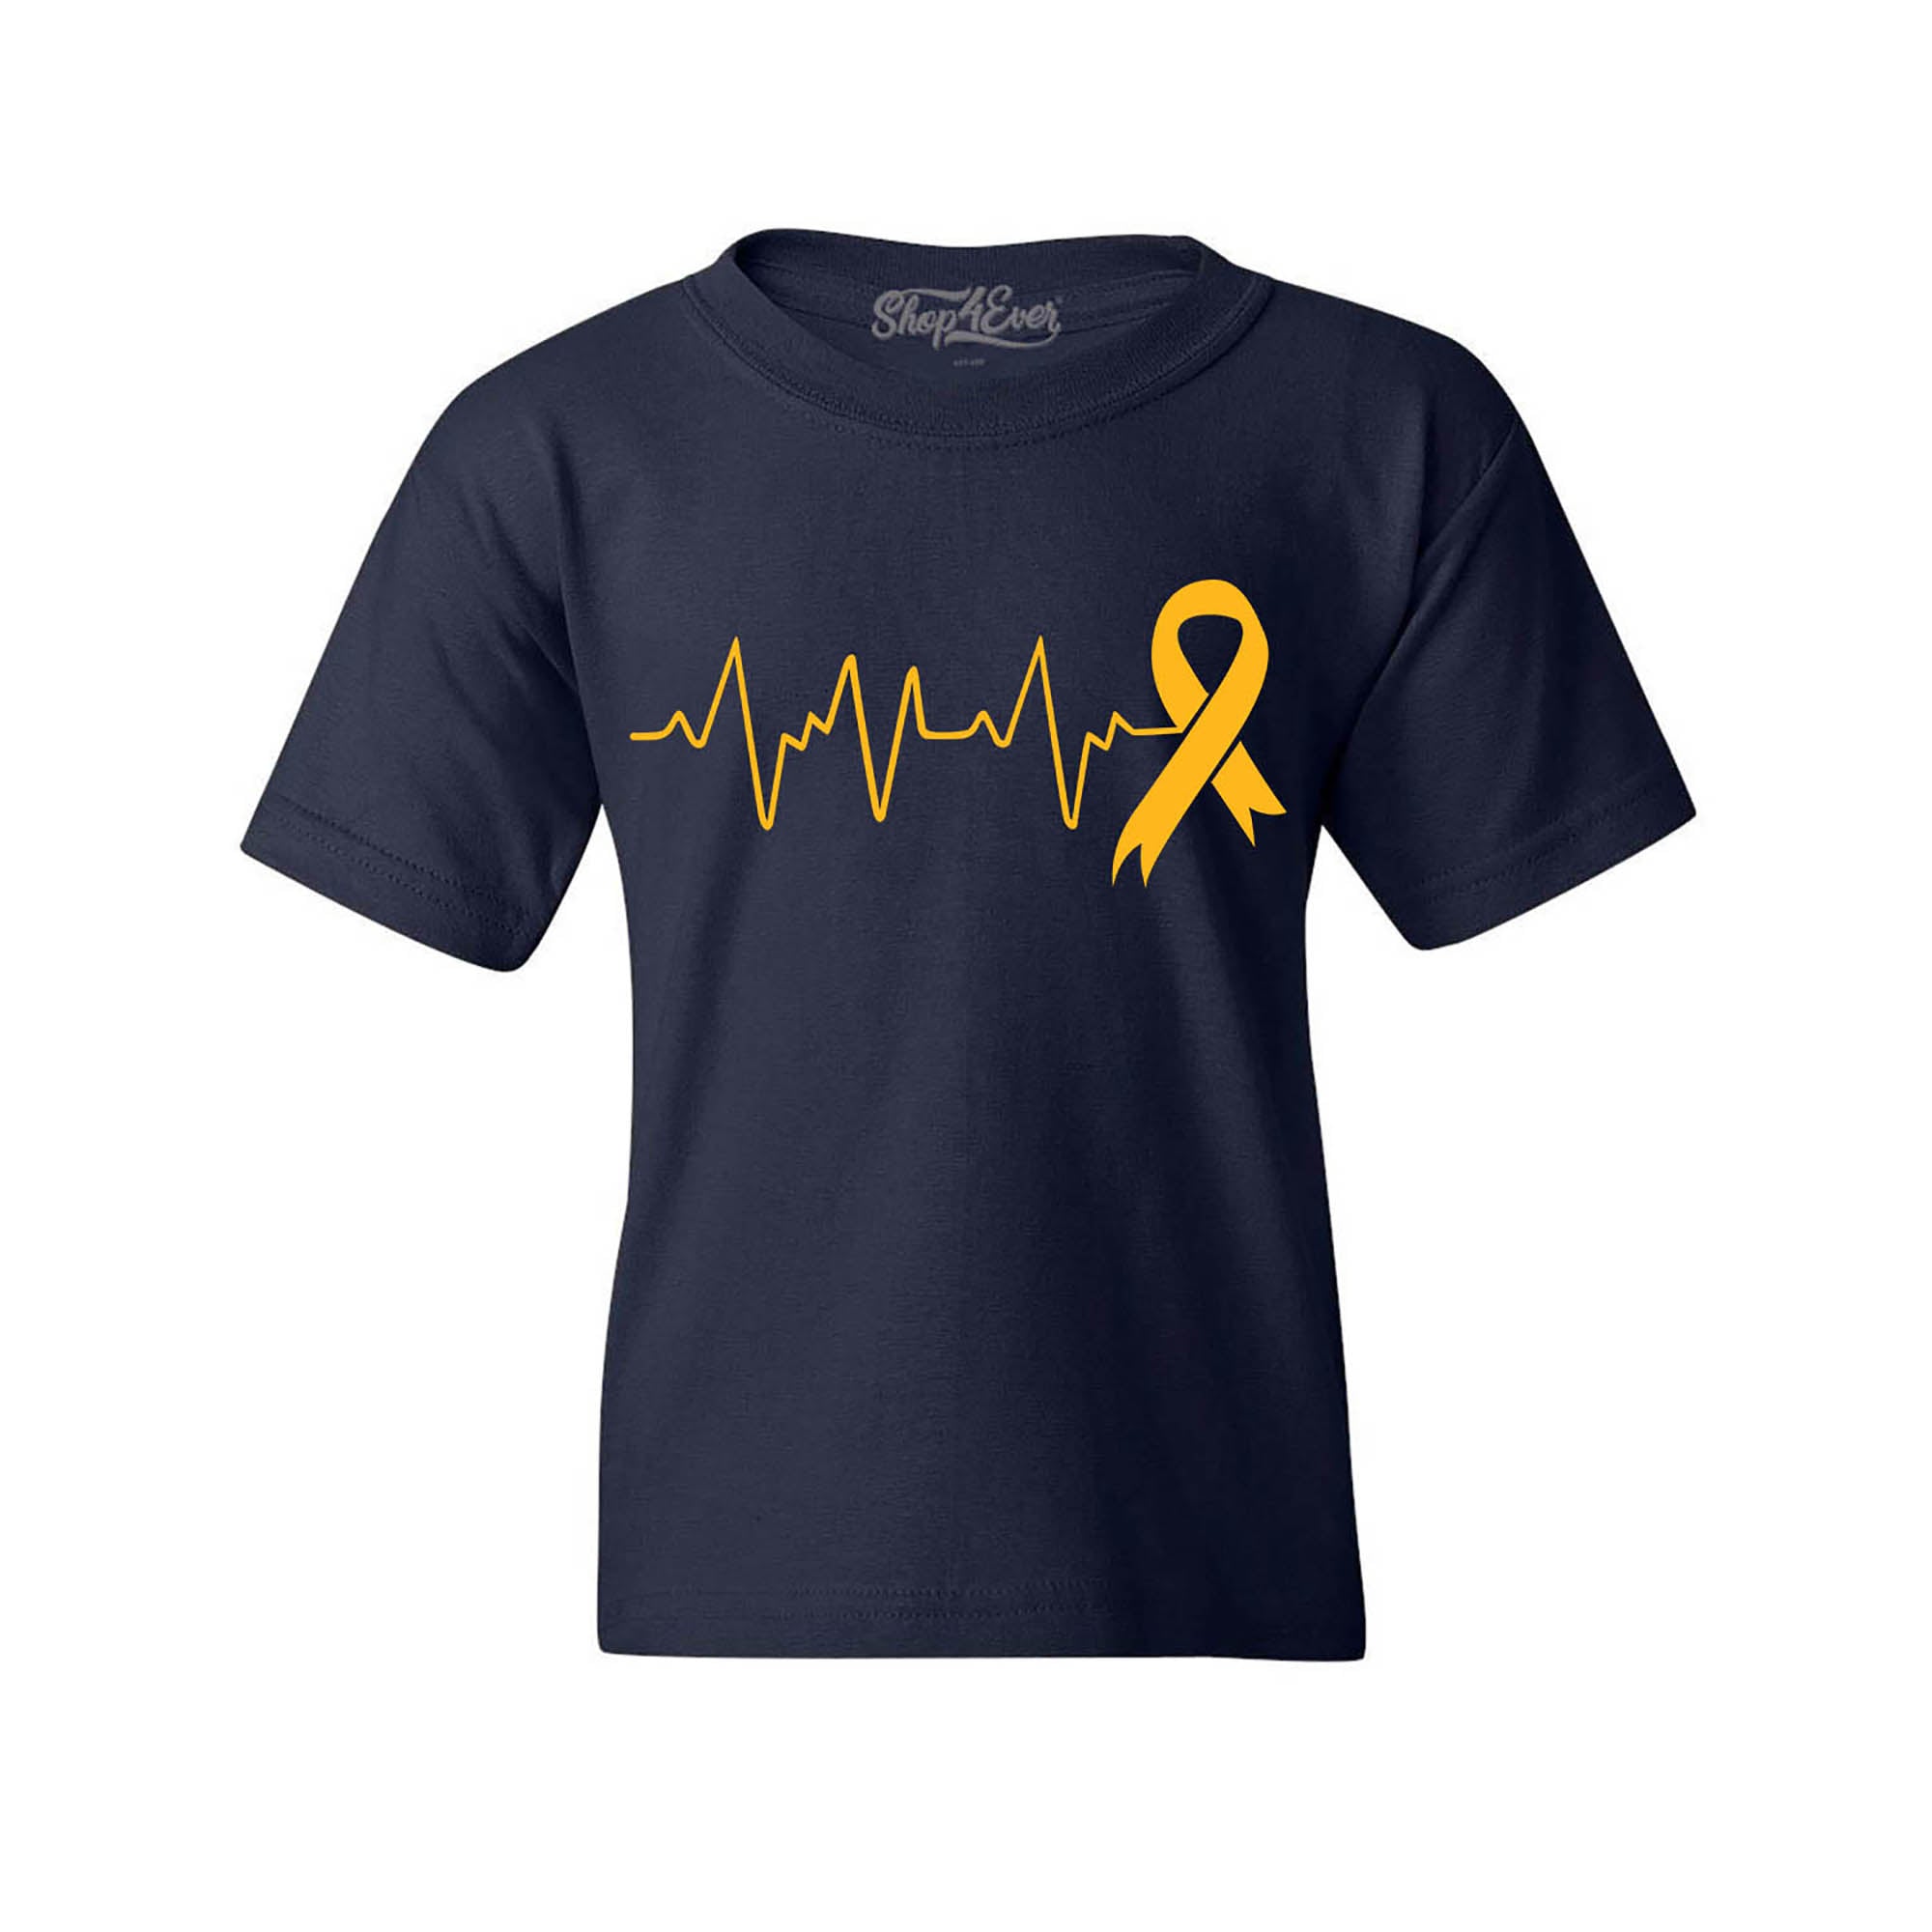 Heartbeat Gold Ribbon Childhood Cancer Awareness Kids Child Youth's T-Shirt